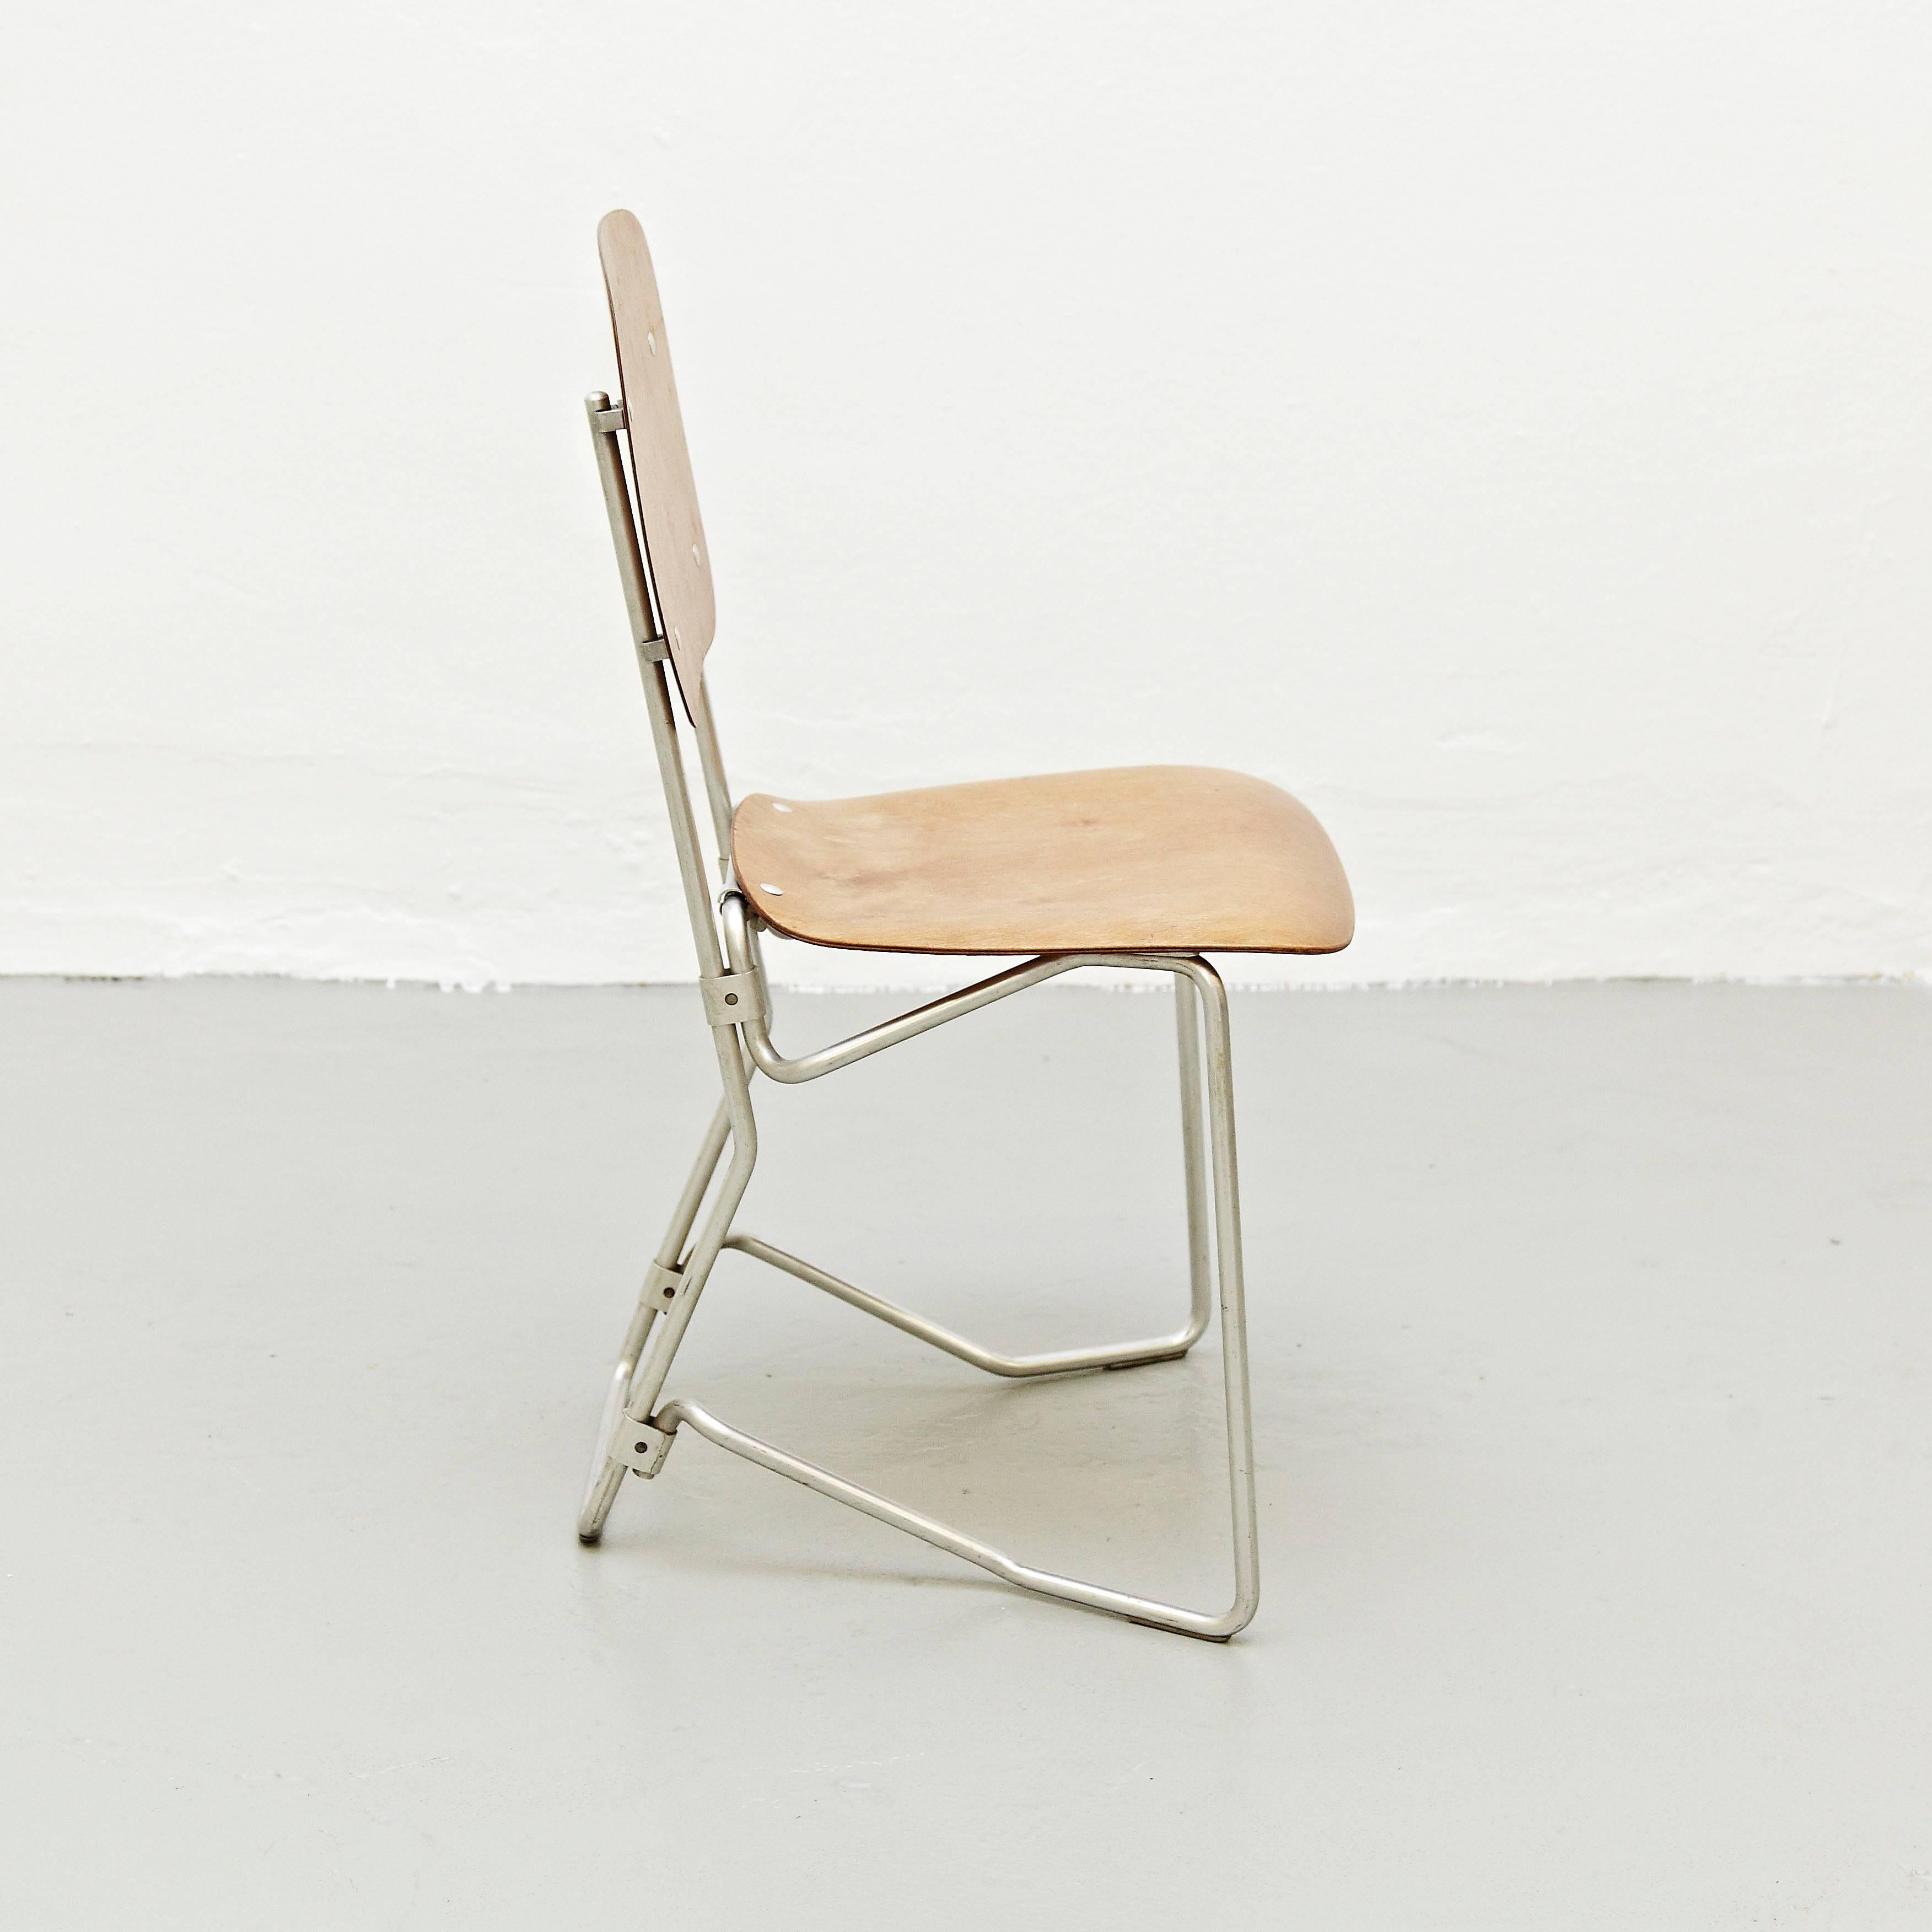 Stackable Aluflex chairs by Armin Wirth for Aluflex, Switzerland, 1950s. 

Rare first edition pair of chairs.

In good original condition, with minor wear consistent with age and use, preserving a beautiful patina.